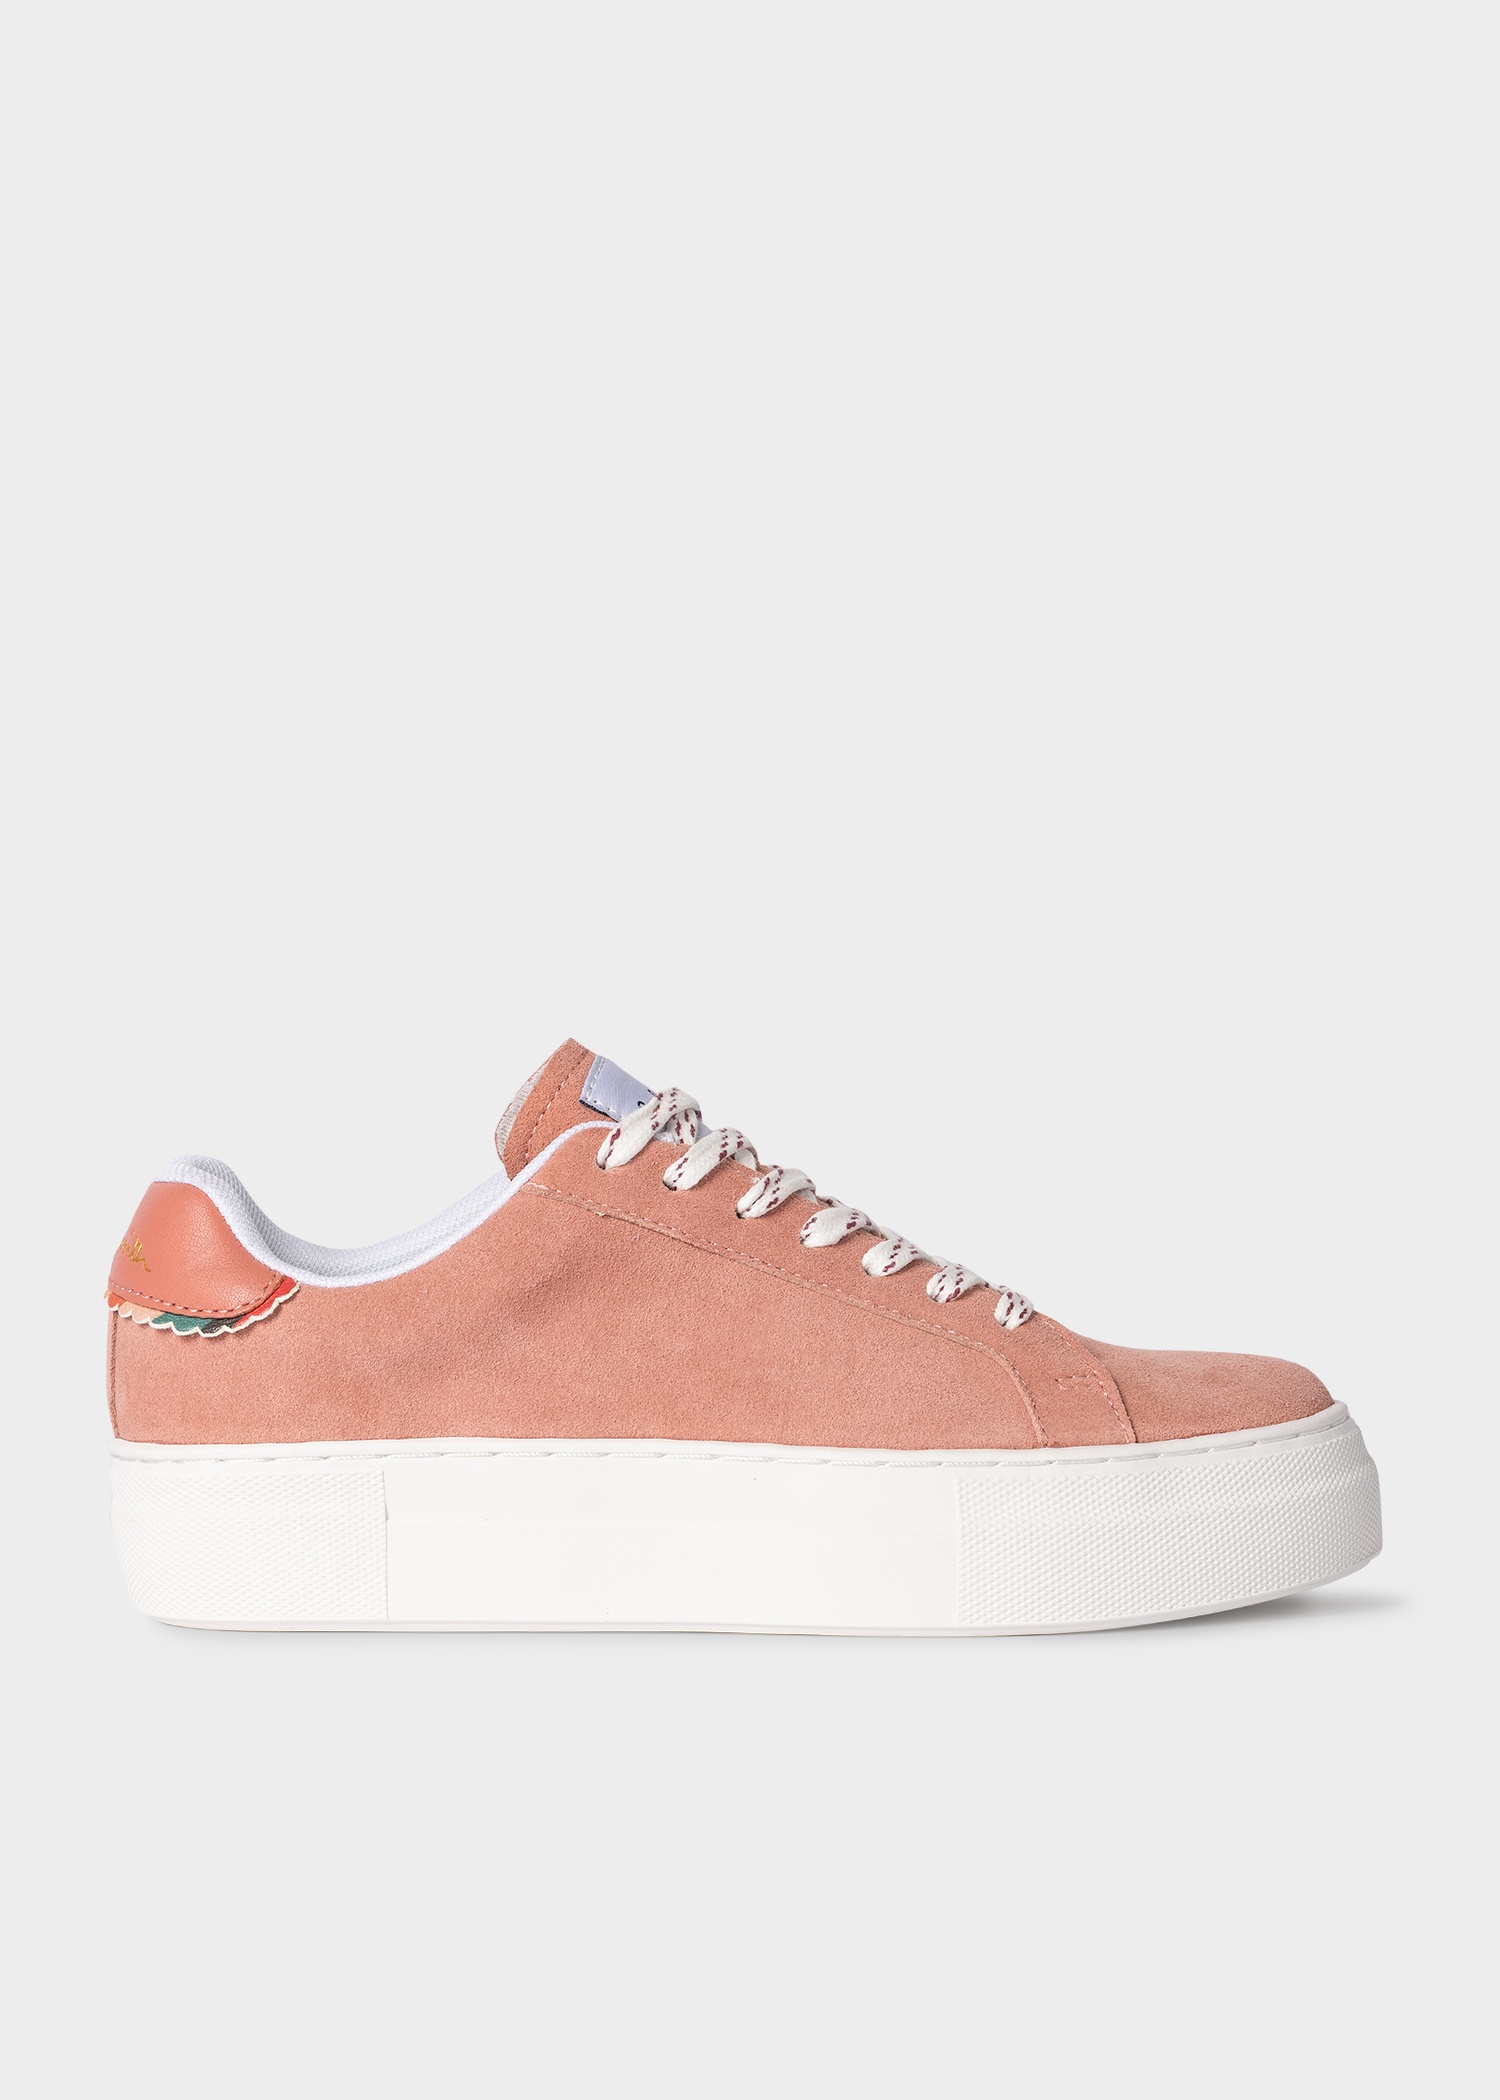 Women's Pink Suede 'Kelly' Trainers - 1